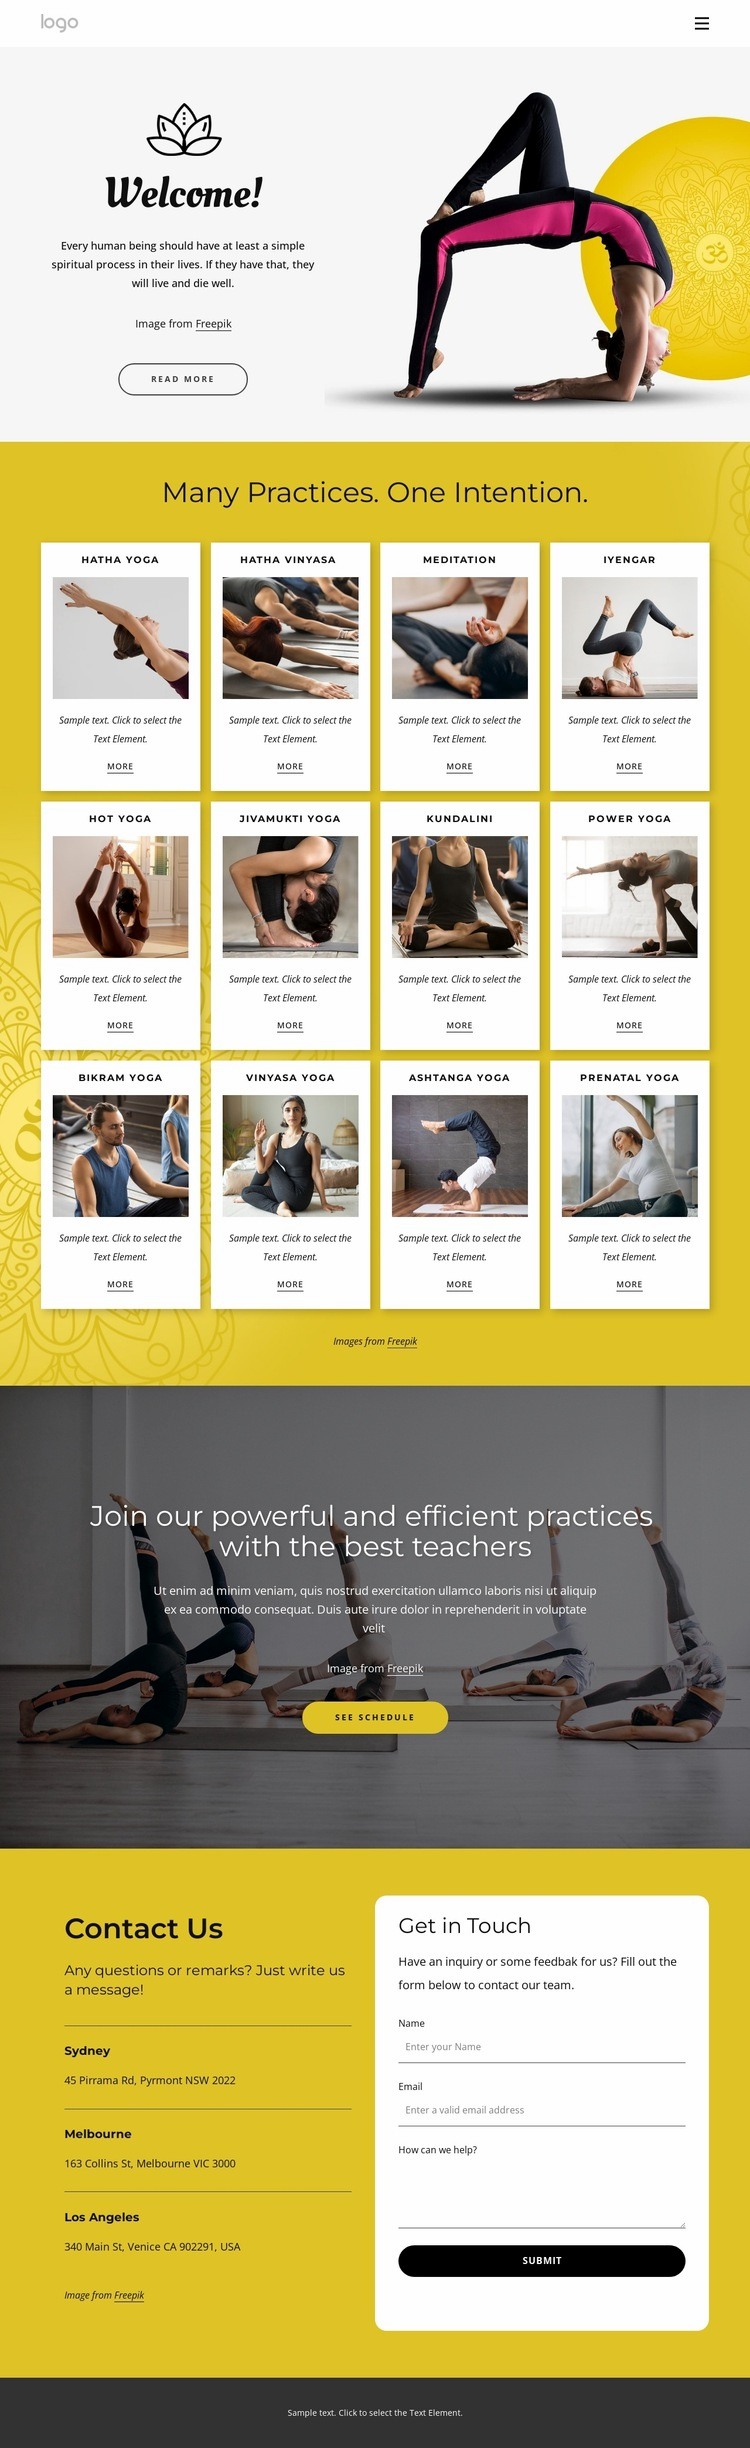 Powerful yoga practices Wix Template Alternative